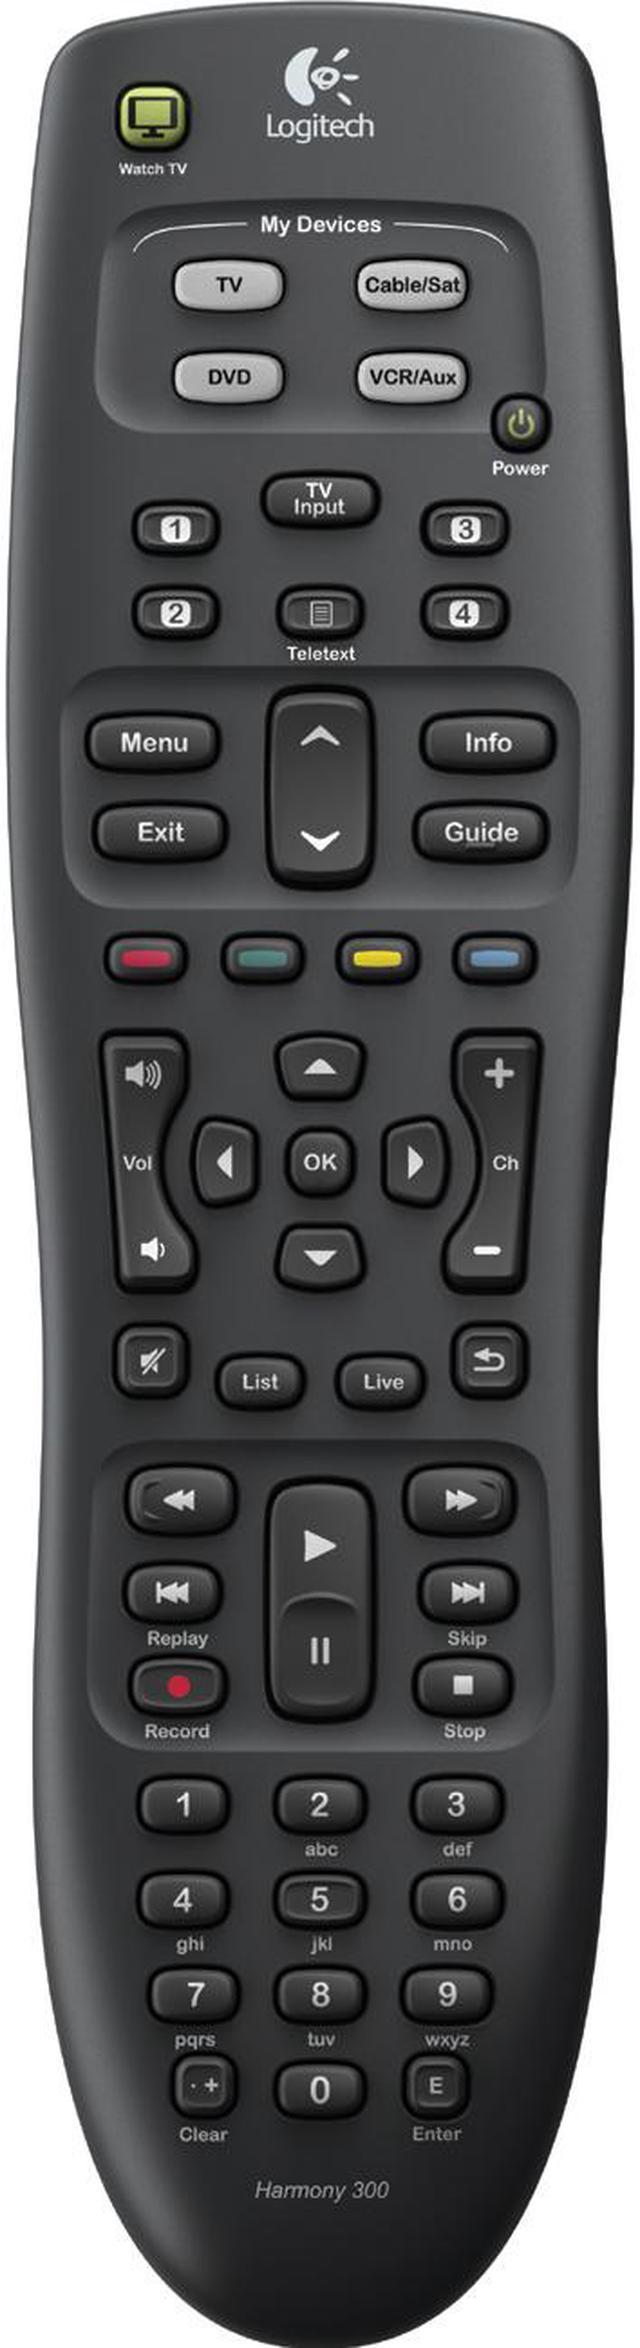 Logitech Harmony ULTIMATE Universal Remote Control, Replaces Up to 15  Remote Controls, Color Screen, Supports More Than 225,000 Devices - Black :  : Electronics